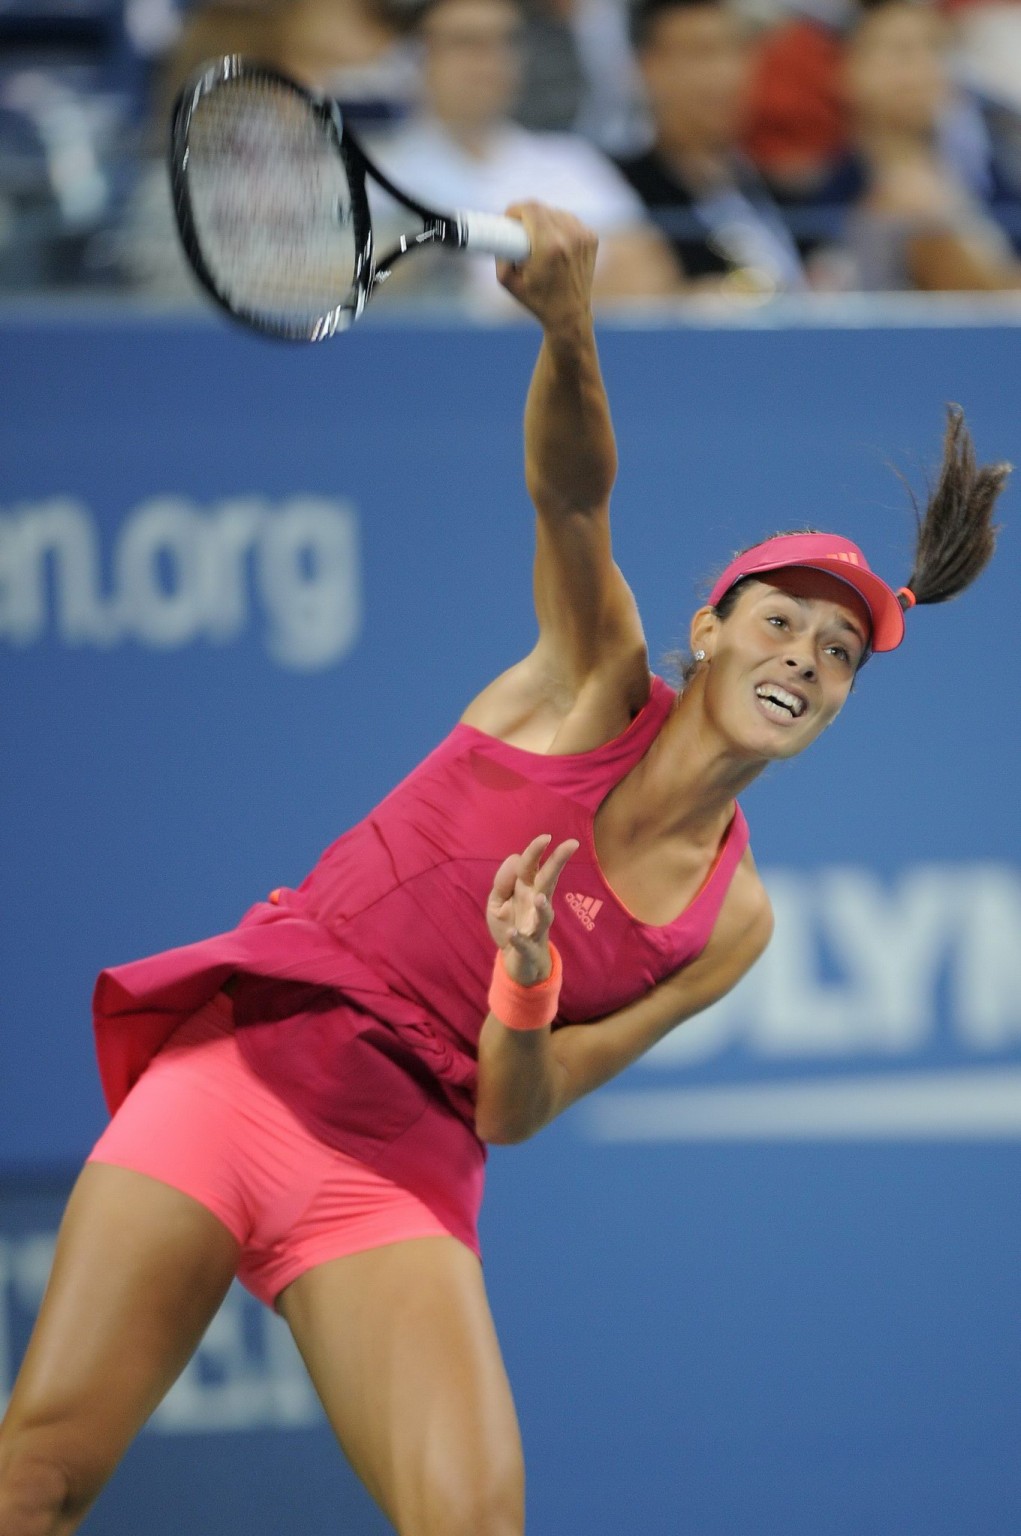 Ana Ivanovic showing cameltoe at the US Open in New York #75289029